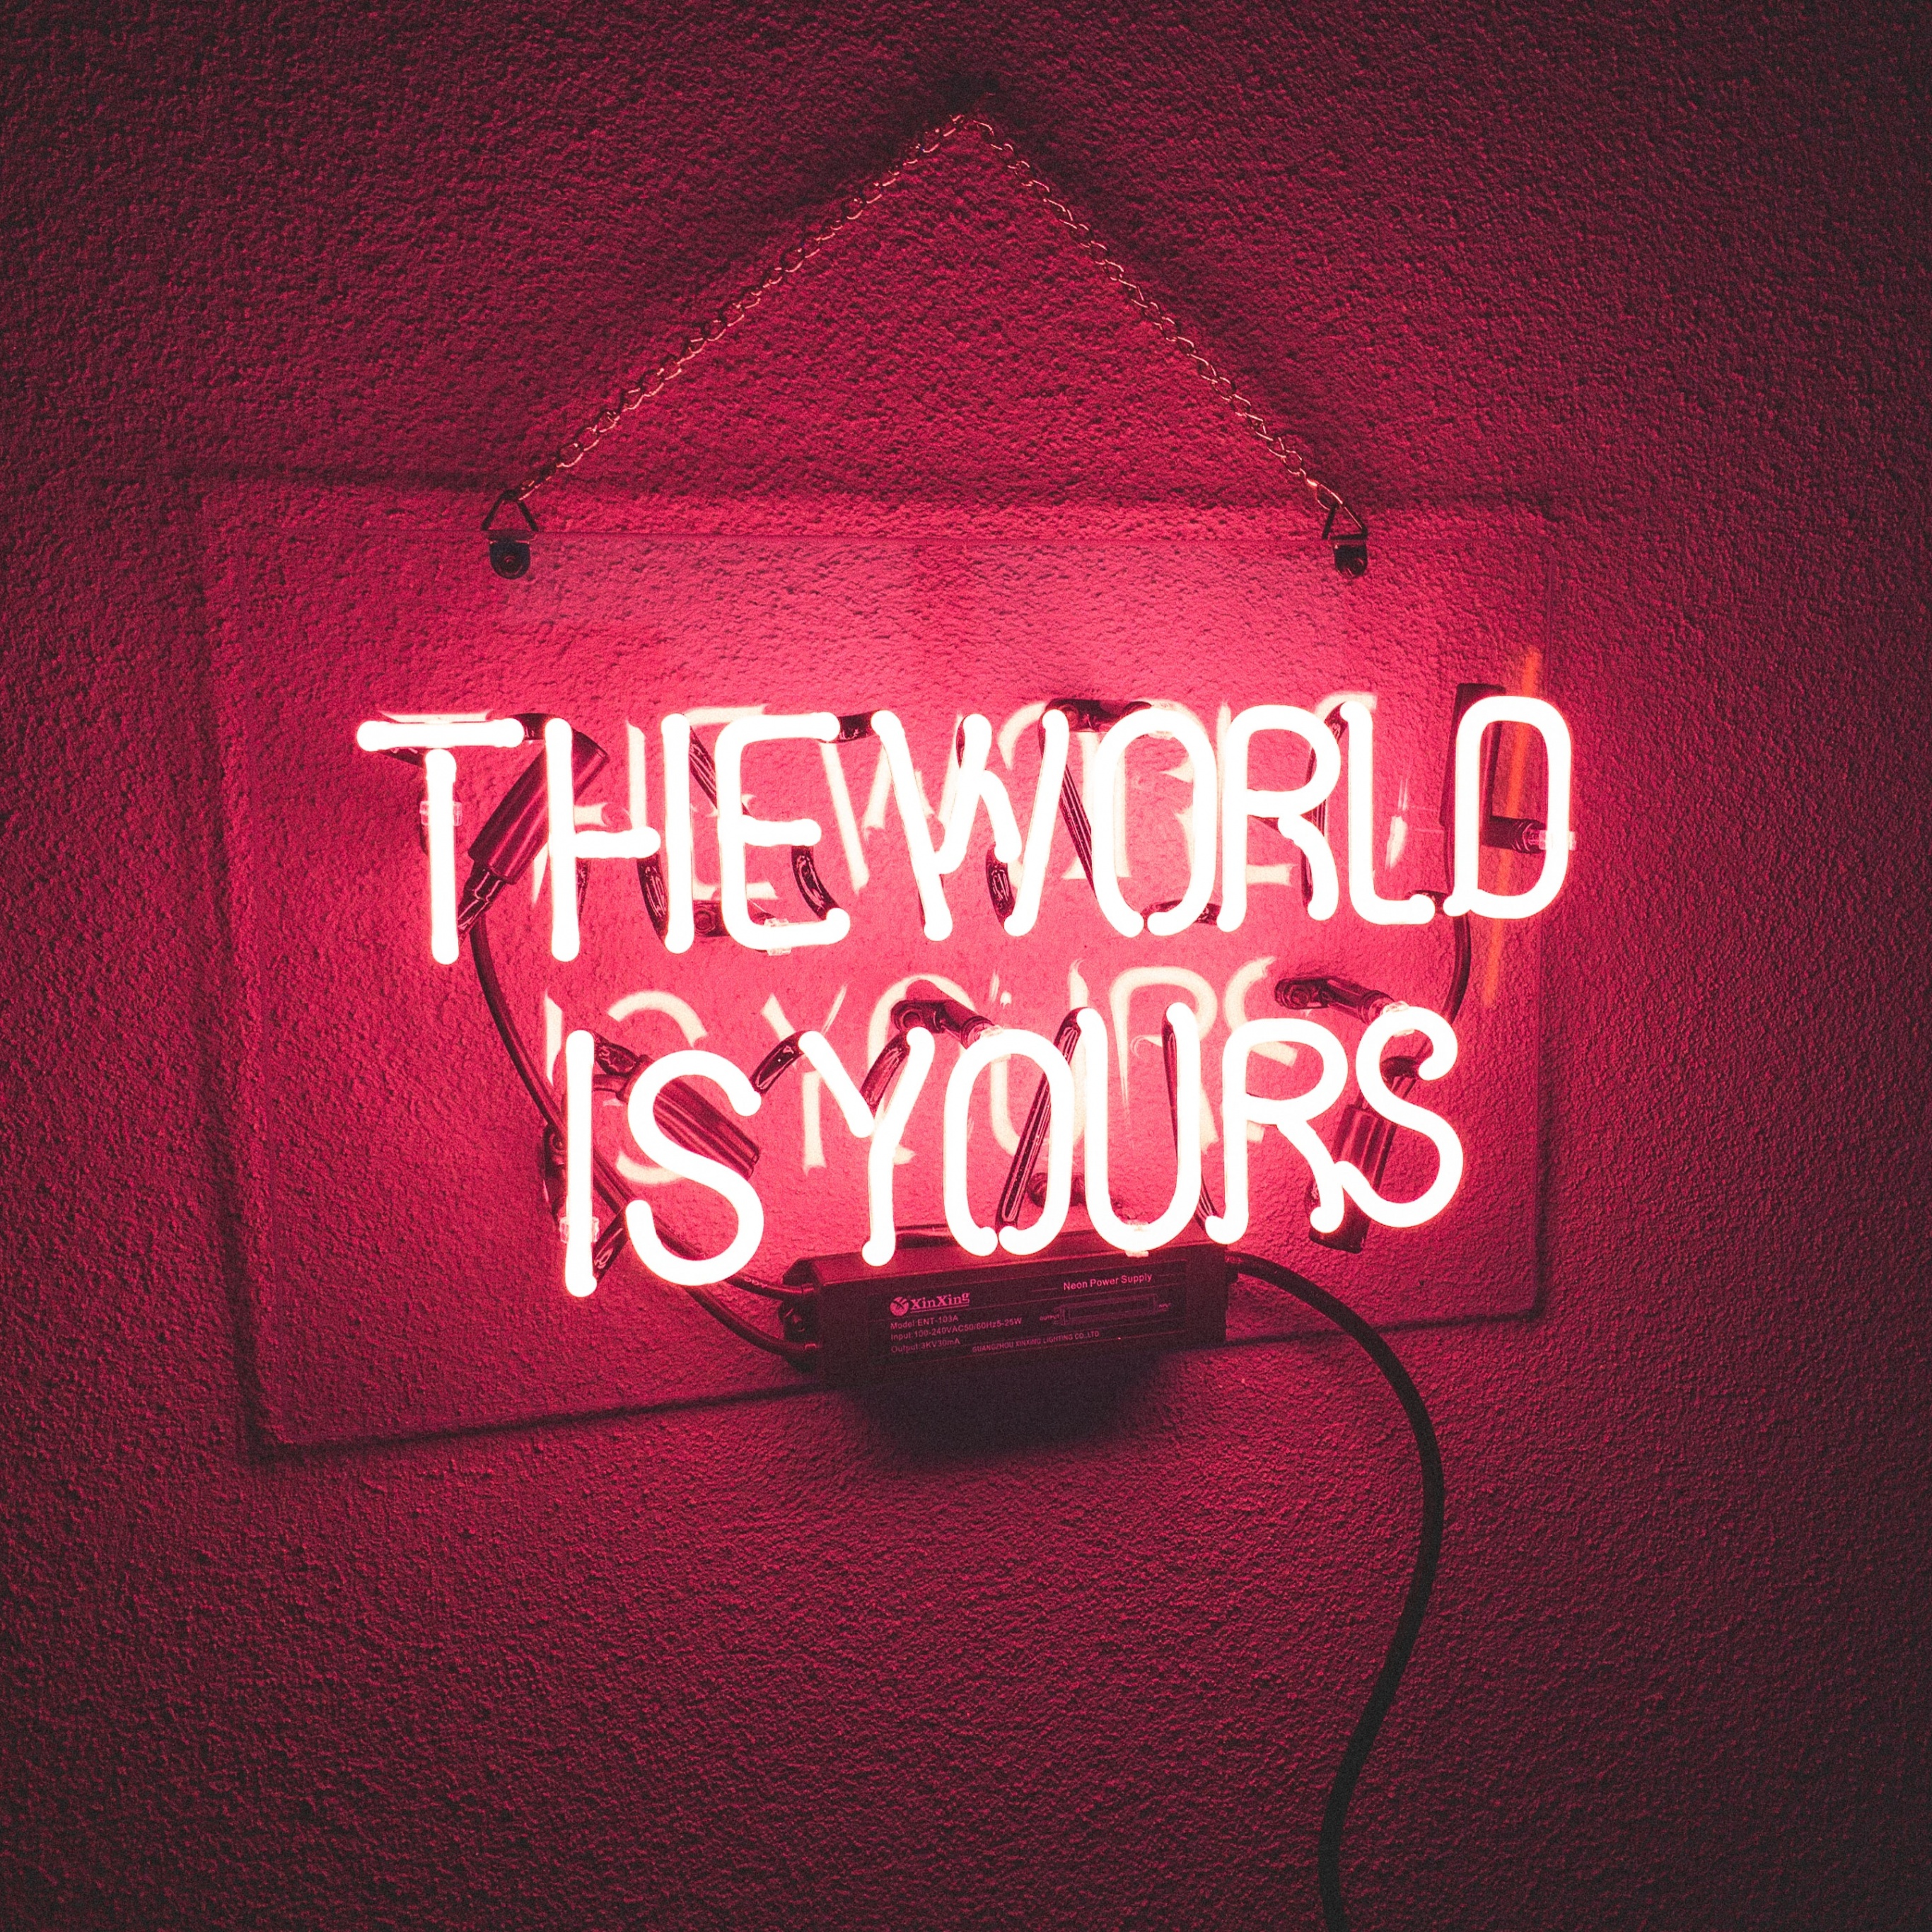 Neon light Wallpaper 4K, Red background, Quotes, #2149